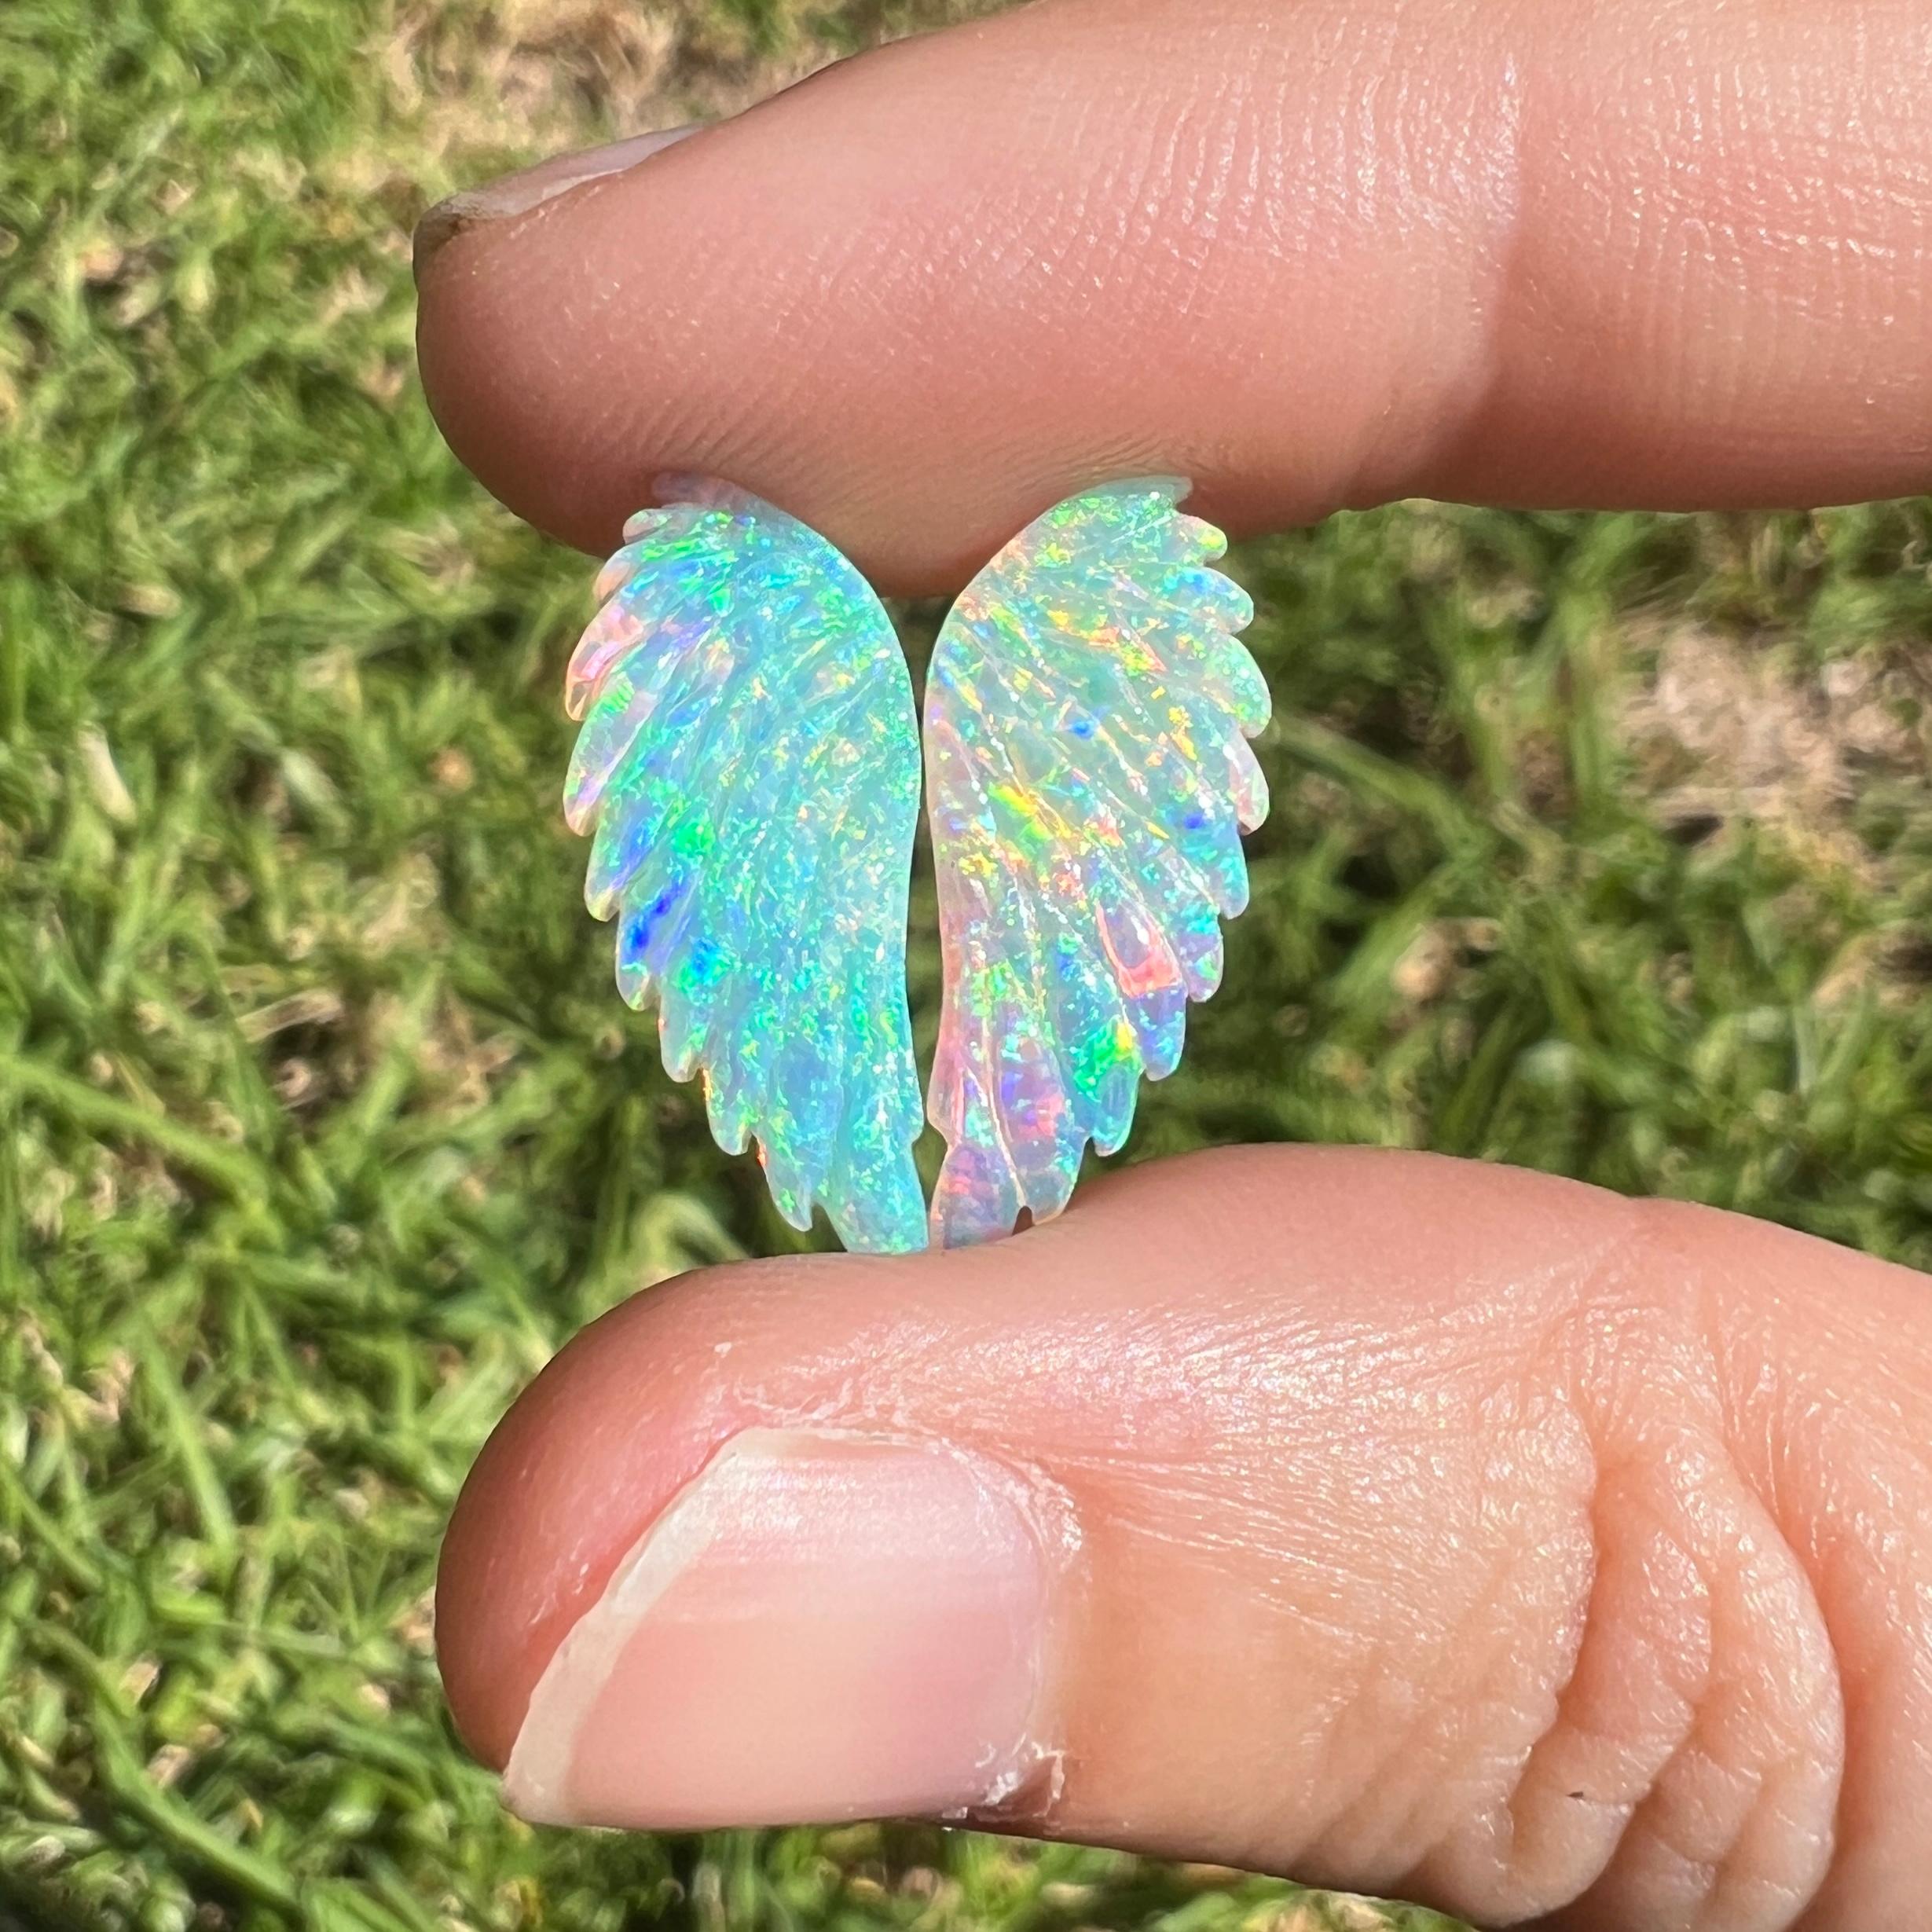 This 4.92 Ct natural Australian gem crystal opal, carved into a pair of angel wings, is a truly exceptional addition to any collection, mined by Sue Cooper herself. Its rarity, coupled with the amazing winged carving, captivates connoisseurs with